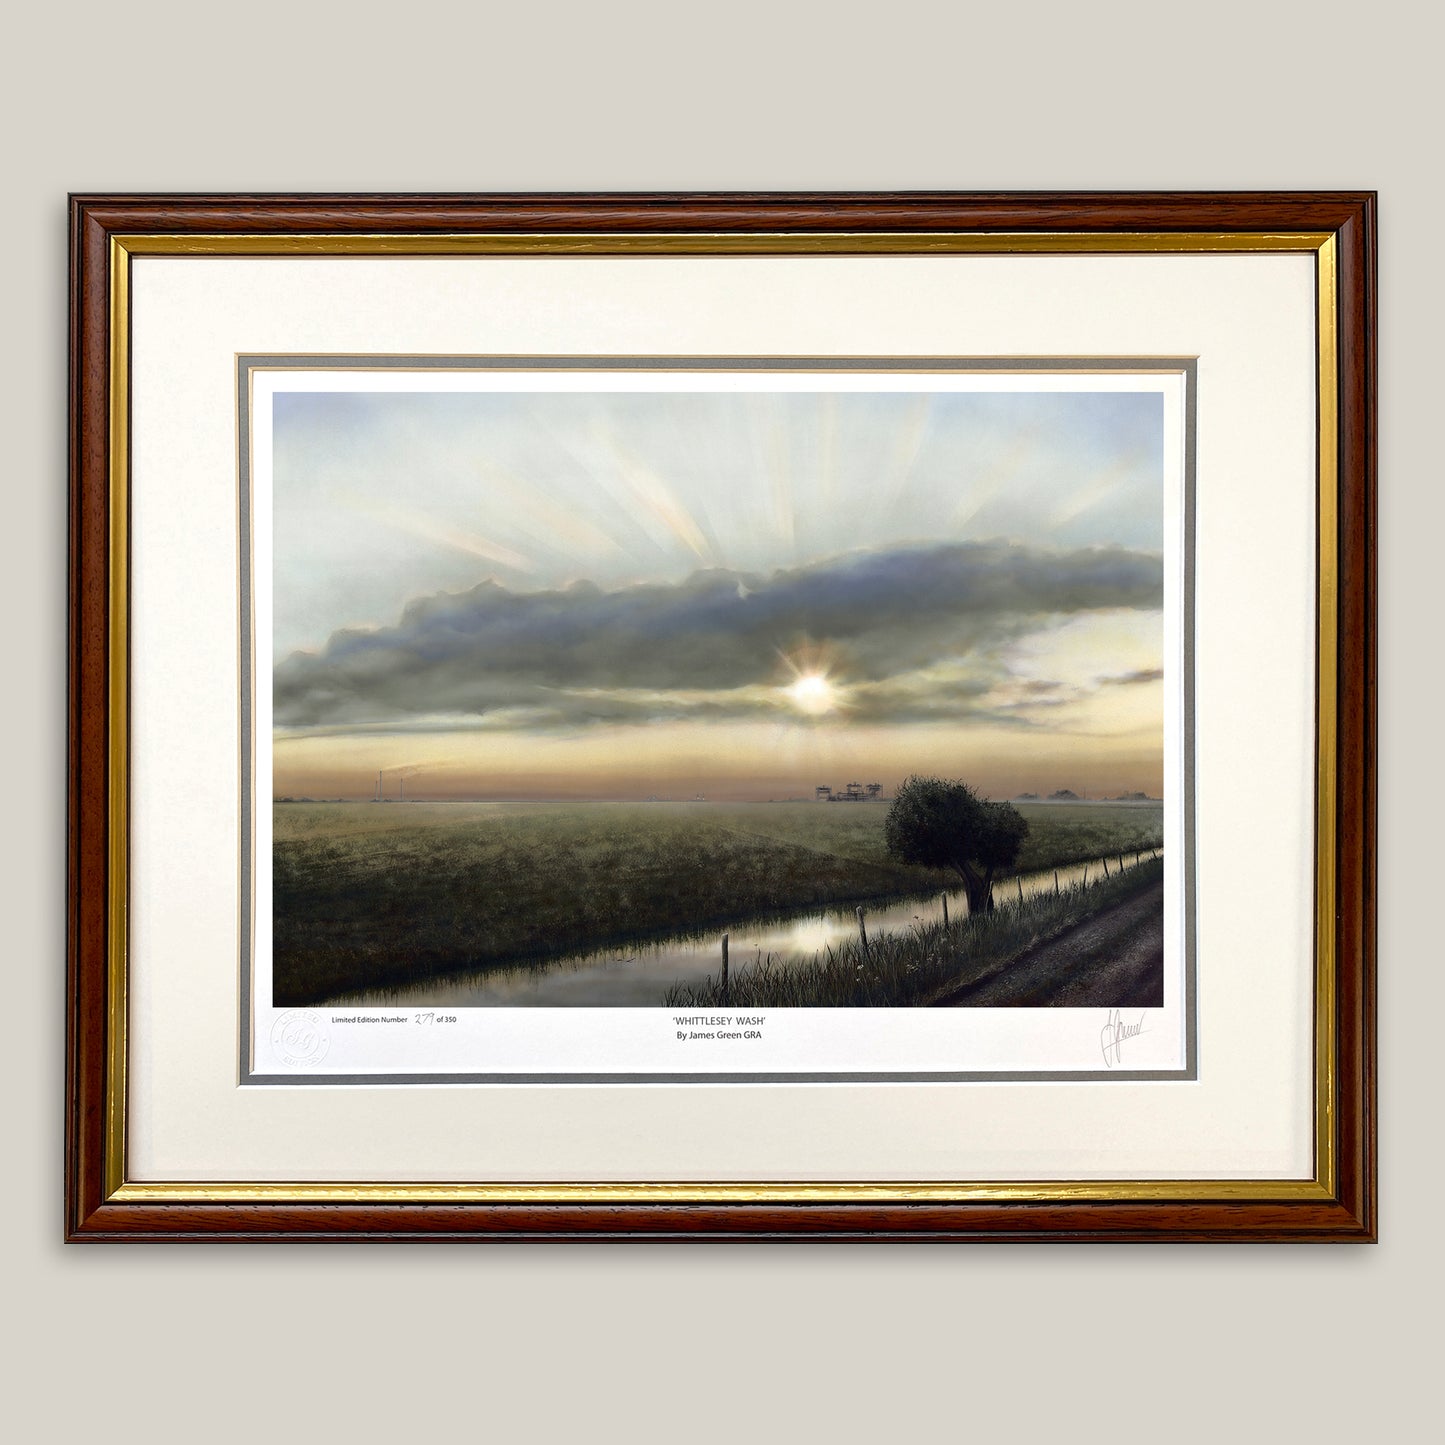 Whittlesey Wash Limited Edition Print